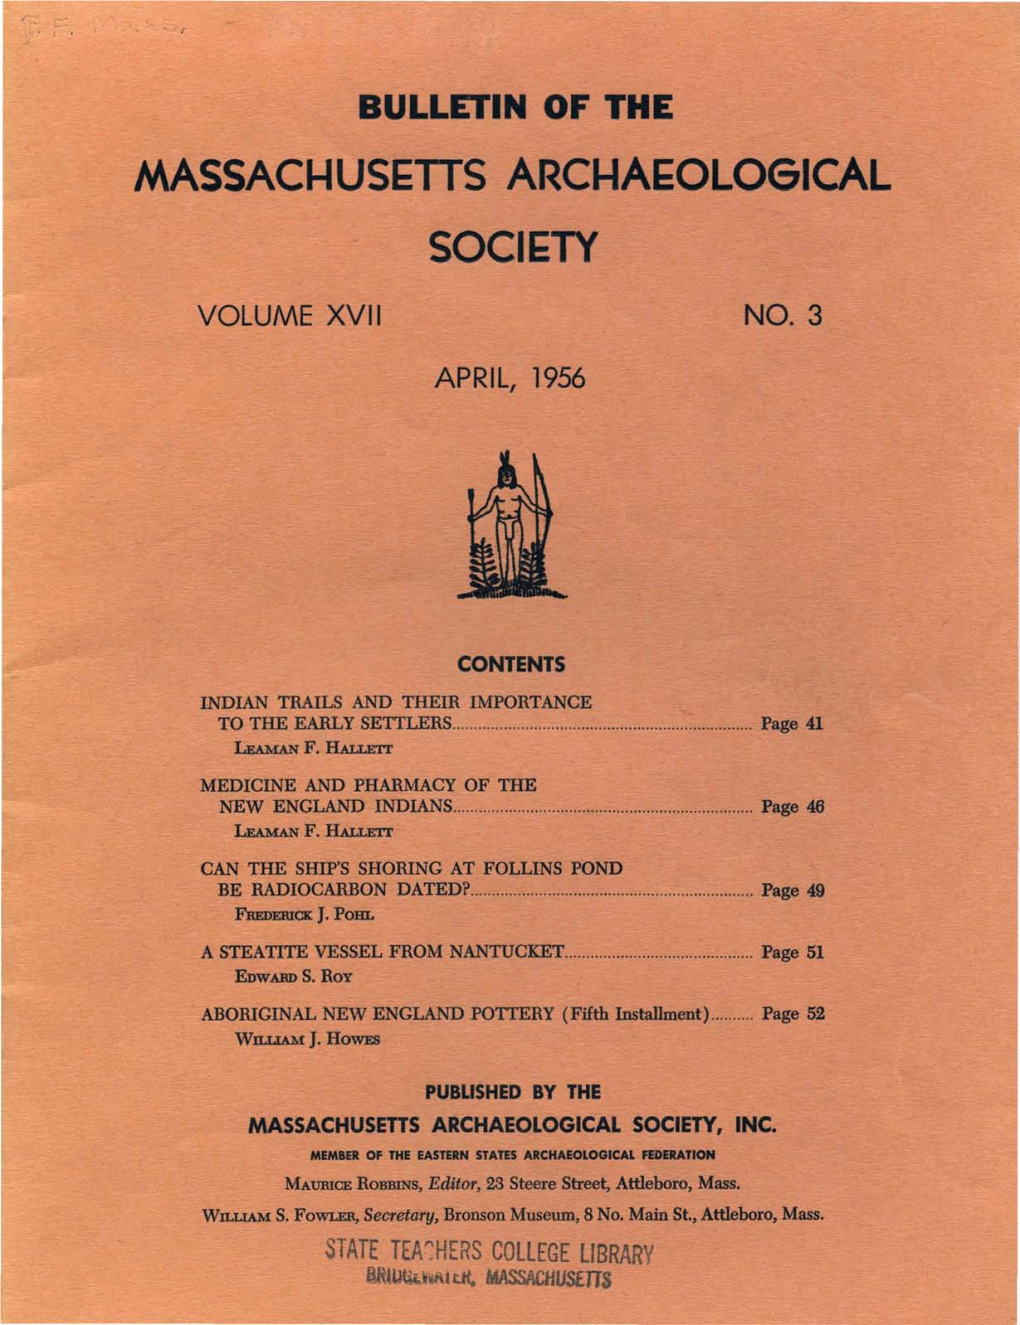 Bulletin of the Massachusetts Archaeological Society, Vol. 17, No. 3. April 1956